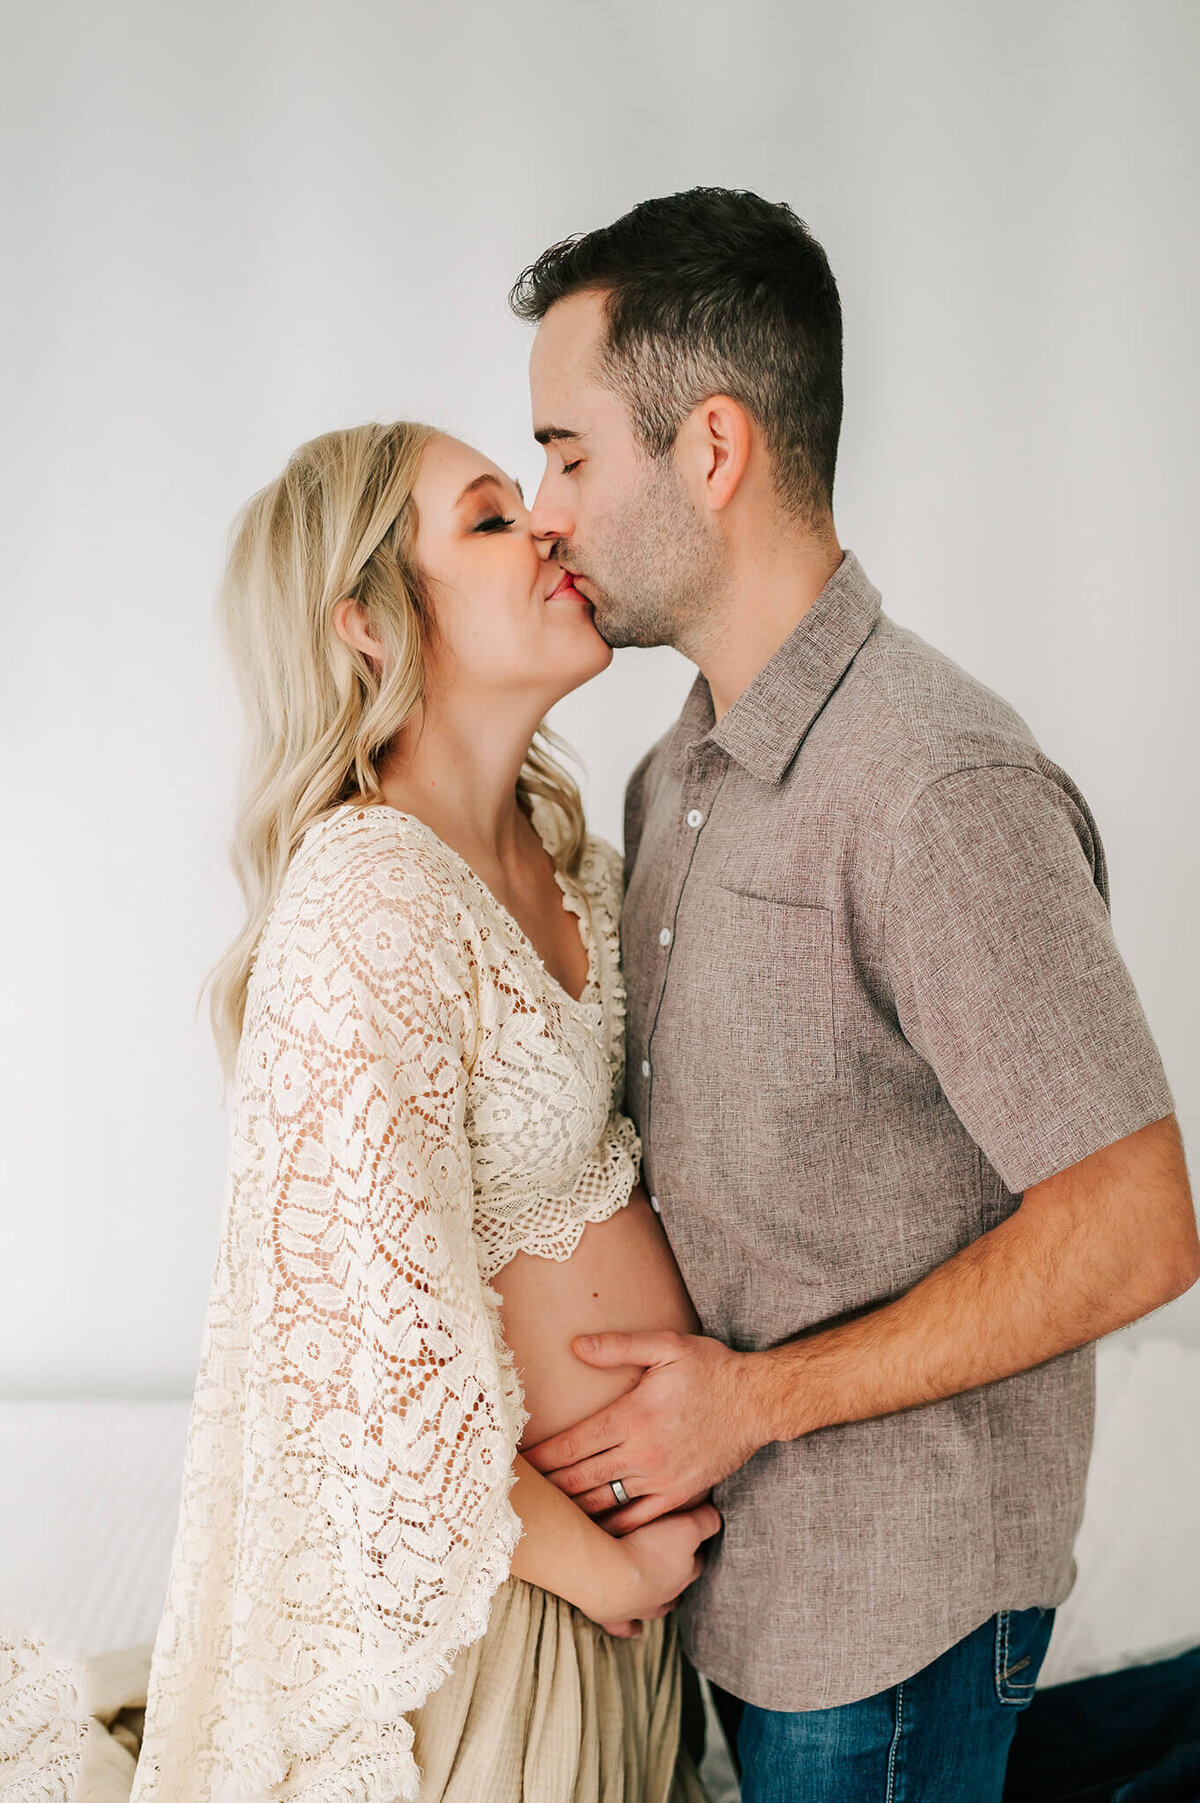 Springfield MO maternity photographer Jessica Kennedy of The XO Photography captures pregnant couple kissing while holding baby bump